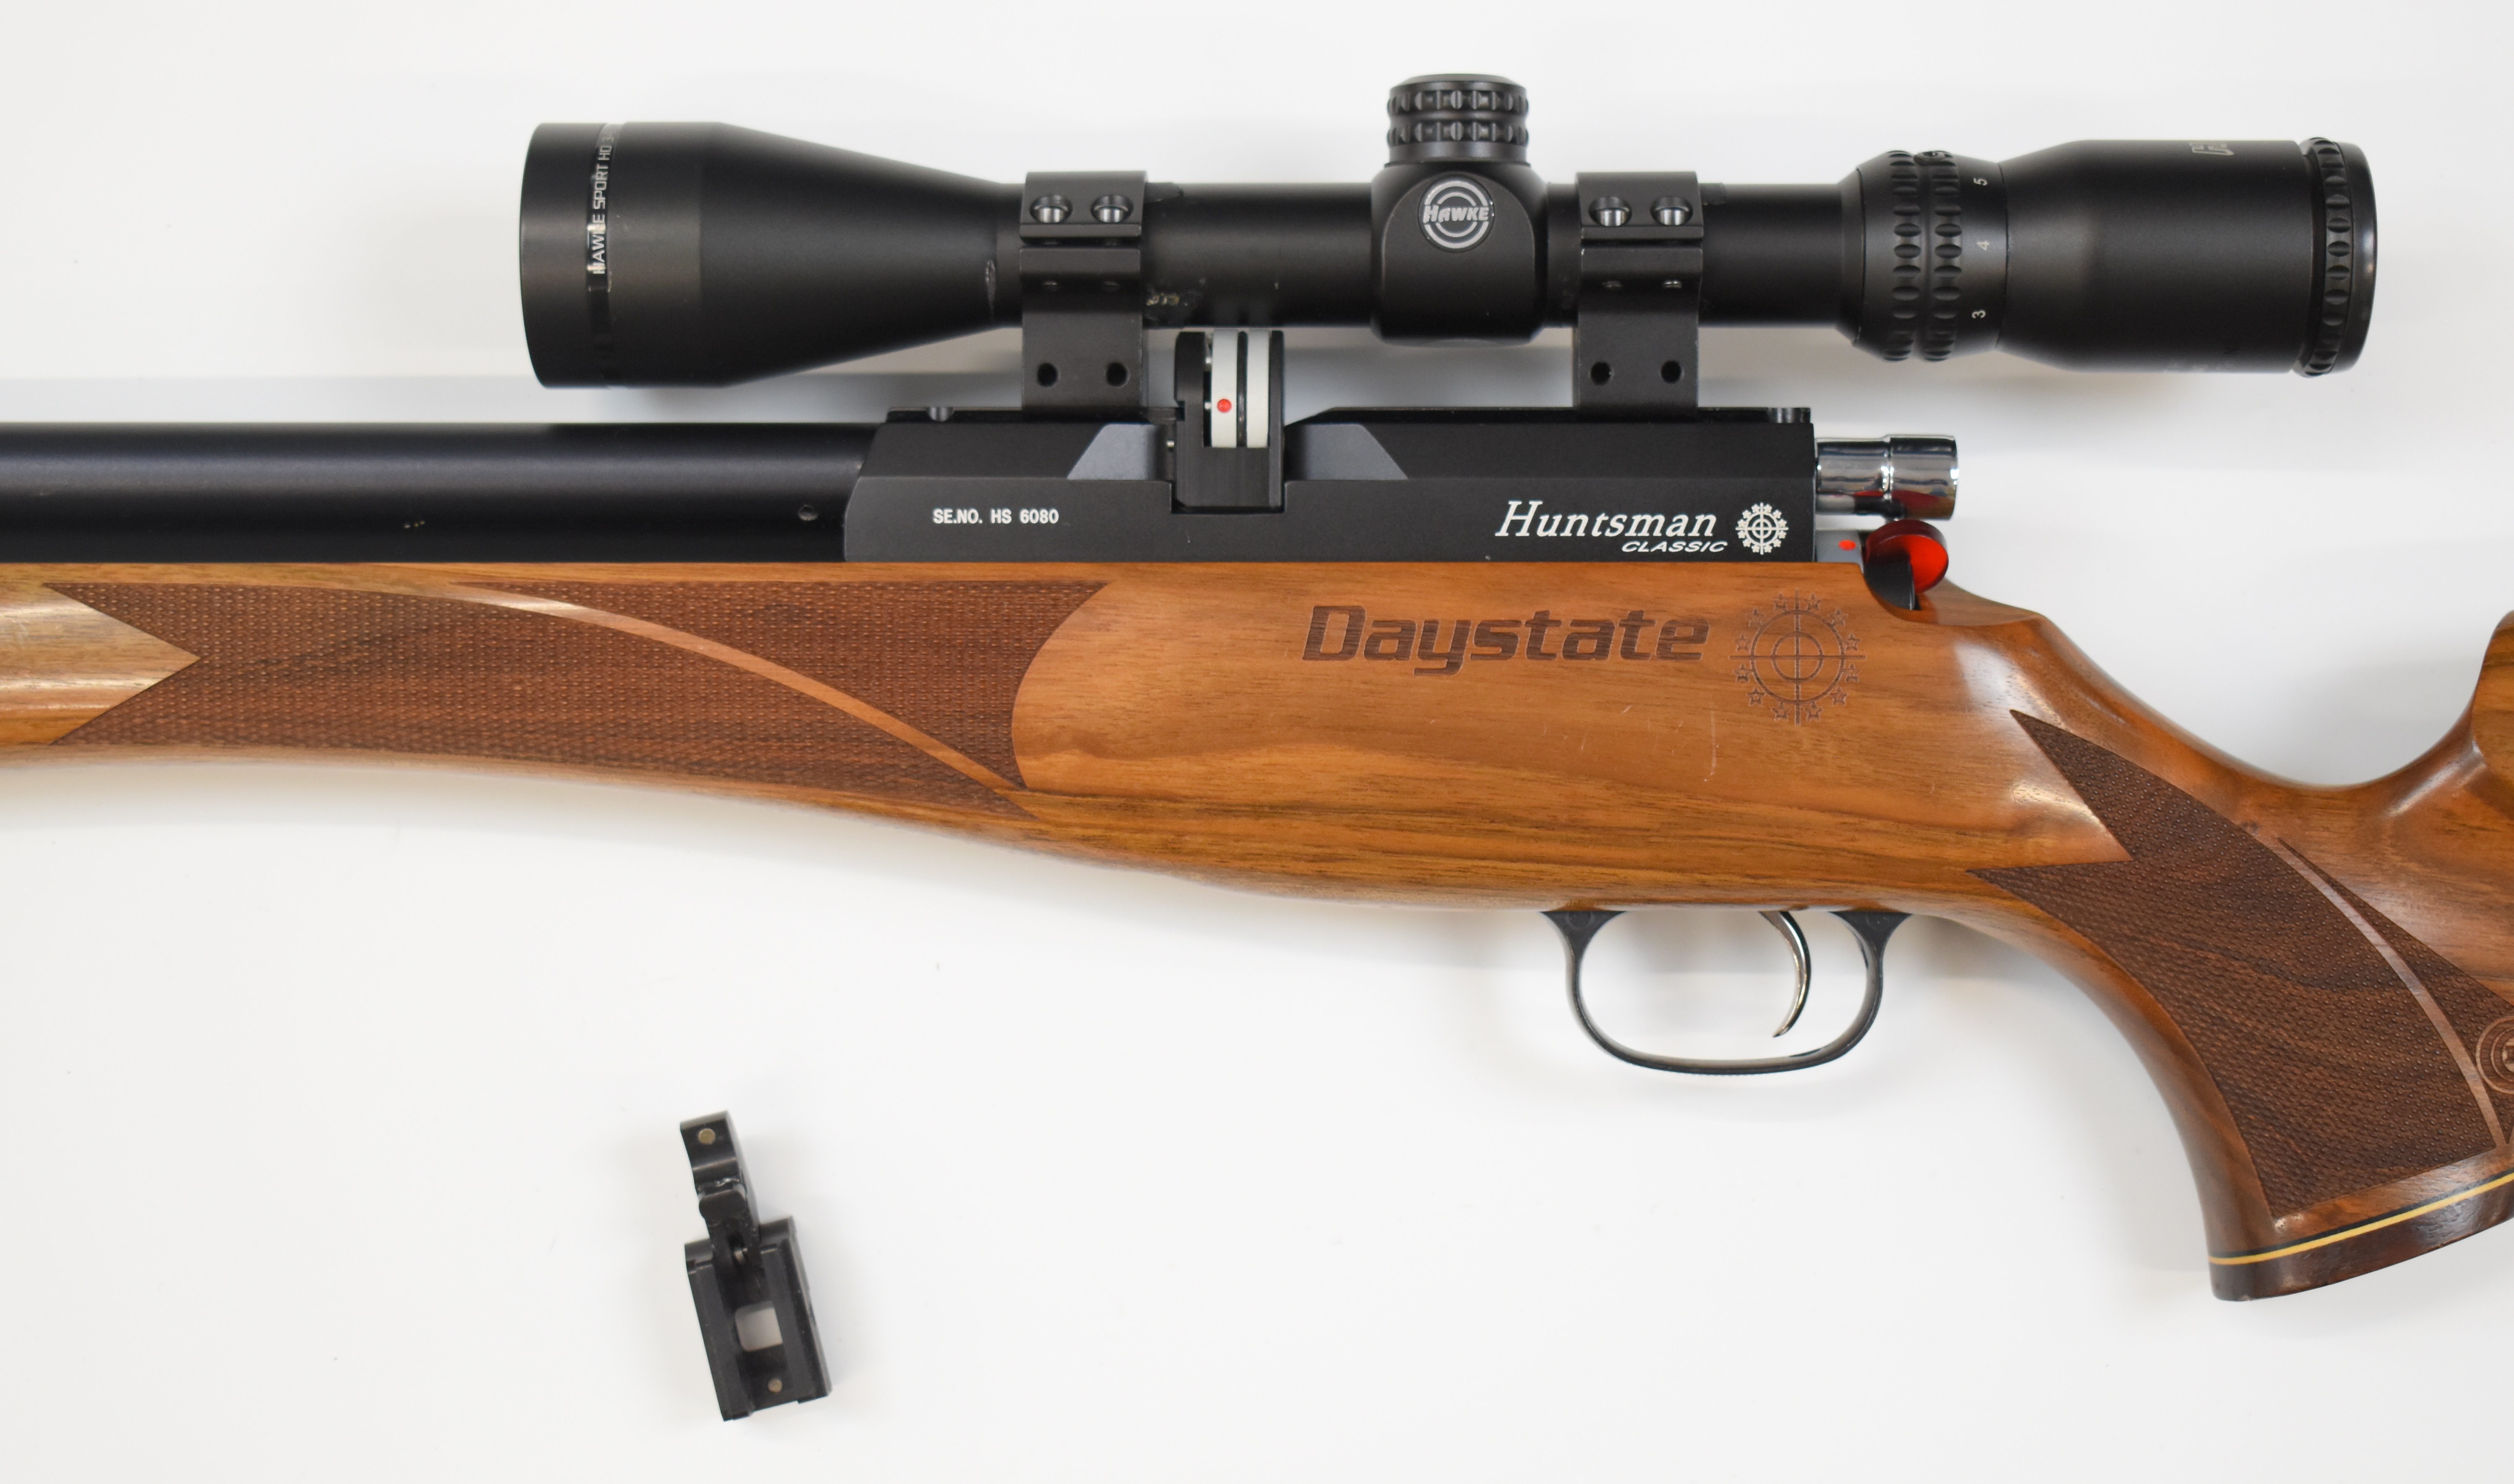 Daystate Huntsman Classic .177 PCP air rifle with monogrammed and chequered semi-pistol grip, - Image 8 of 9